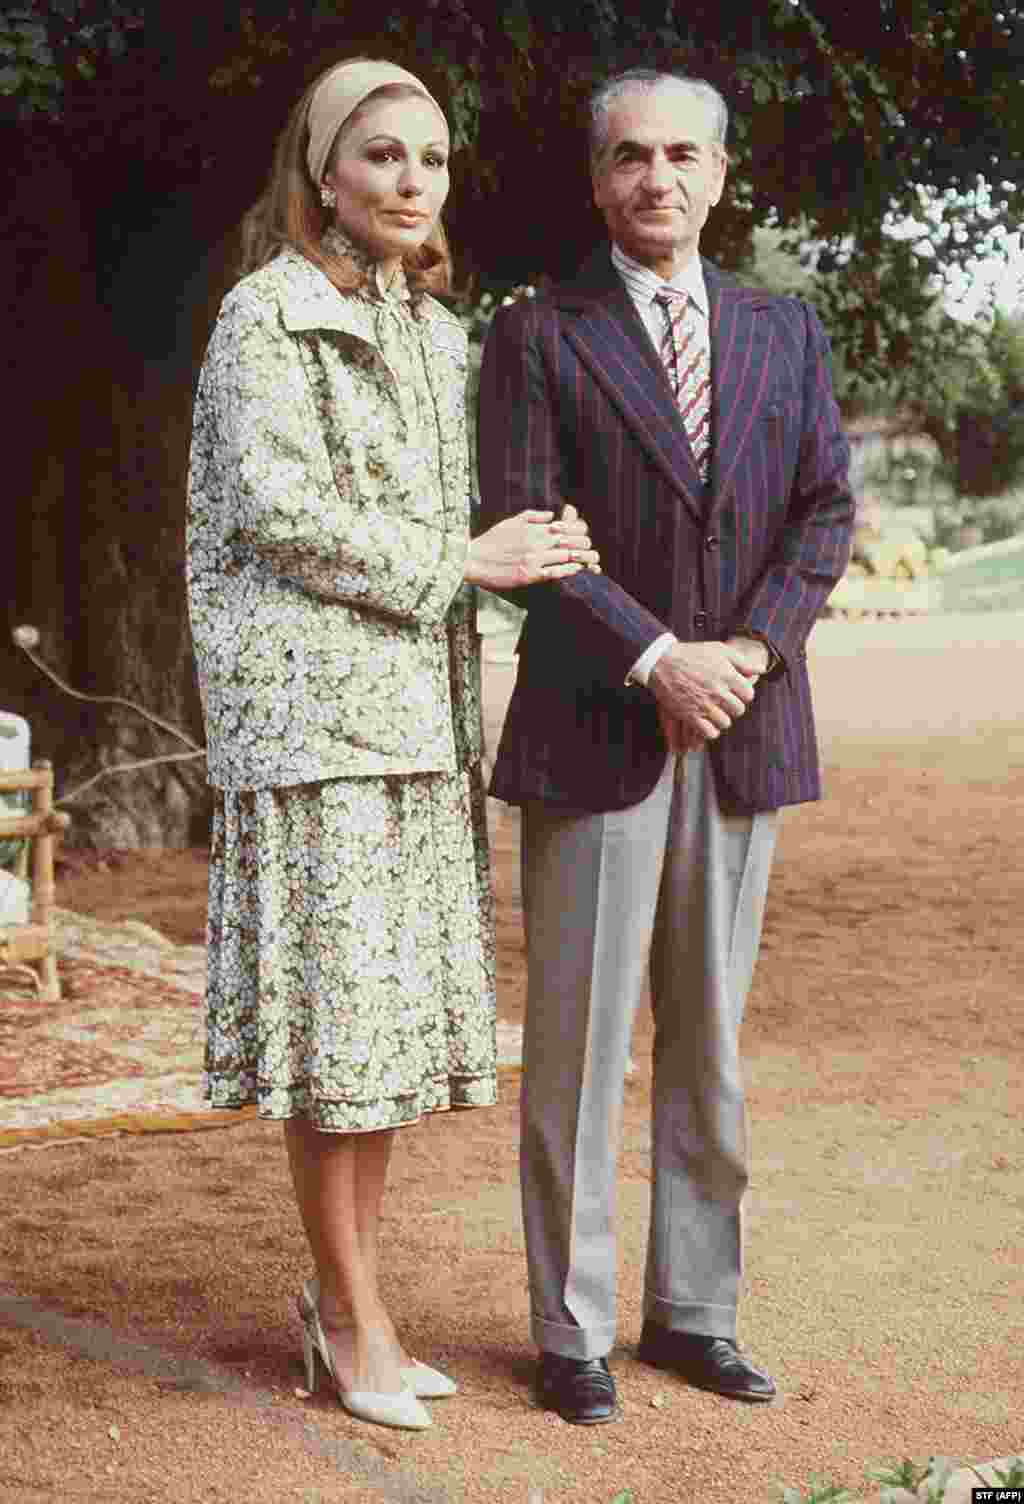 The deposed shah and Farah pose for a photographer in Marrakesh, Morocco, a few days after fleeing Iran in January 1979.